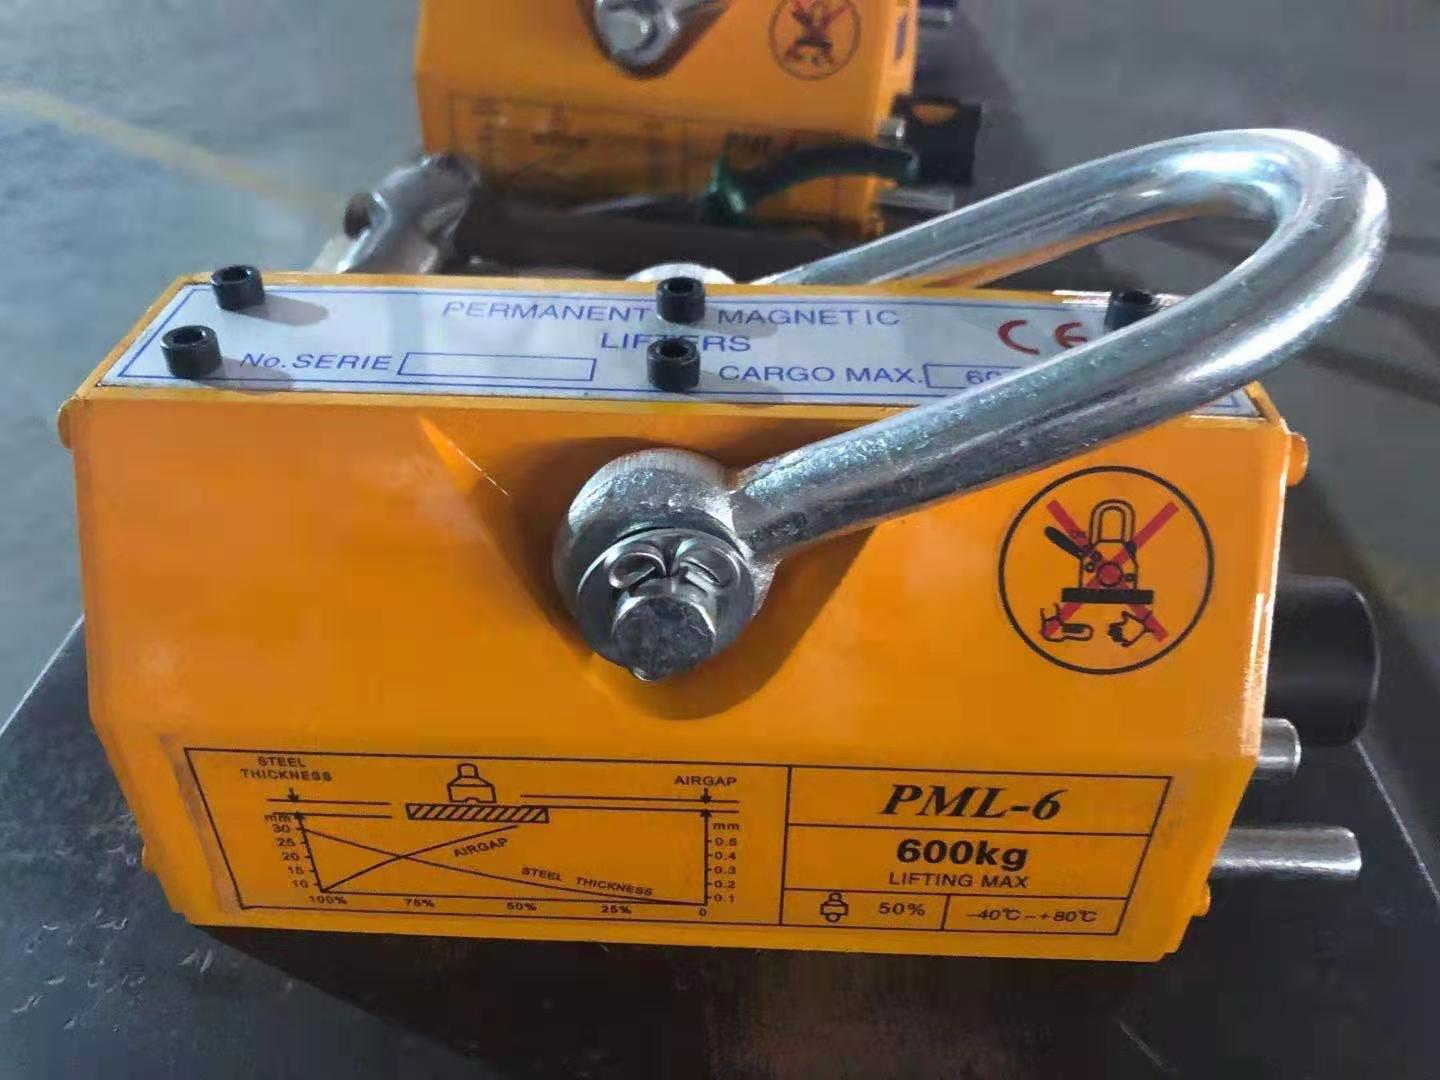 Site photos of 600kg Permanent Magnetic Lifter  (2.5 times safety factor)4.jpg